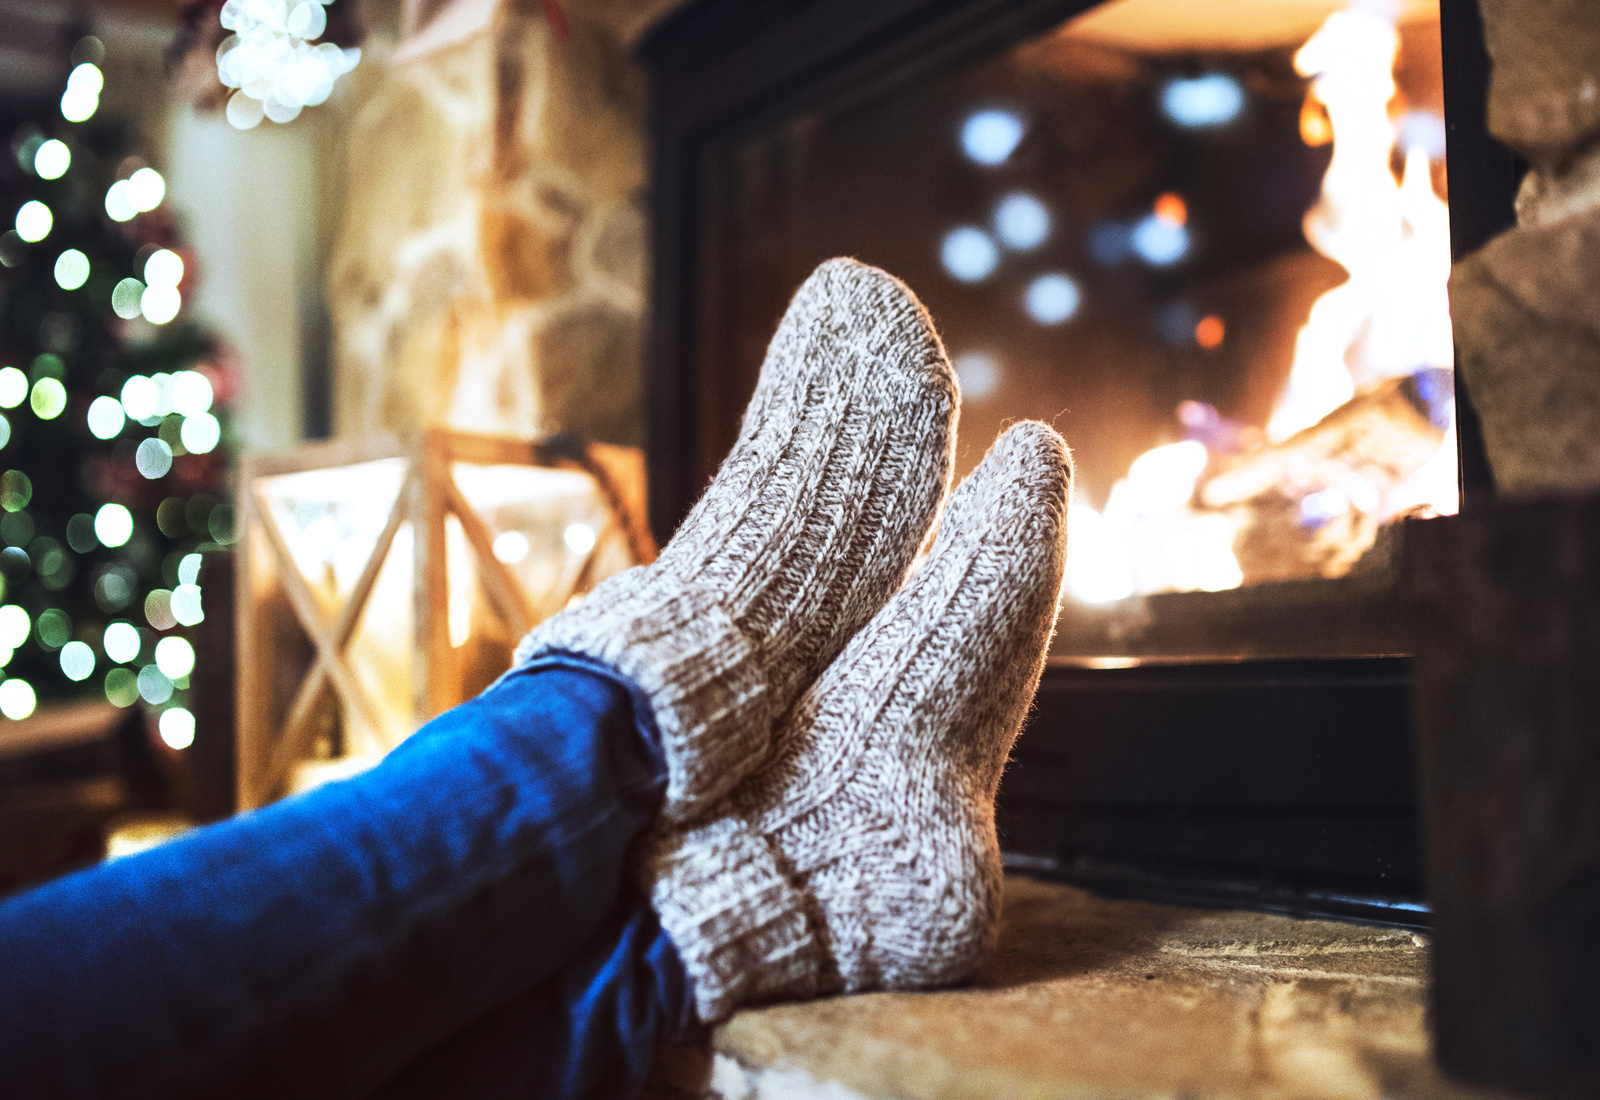 ❄️ Pick a Warm Outfit for Winter and We’ll Guess Your Age and Height Cosy warm socks fireplace